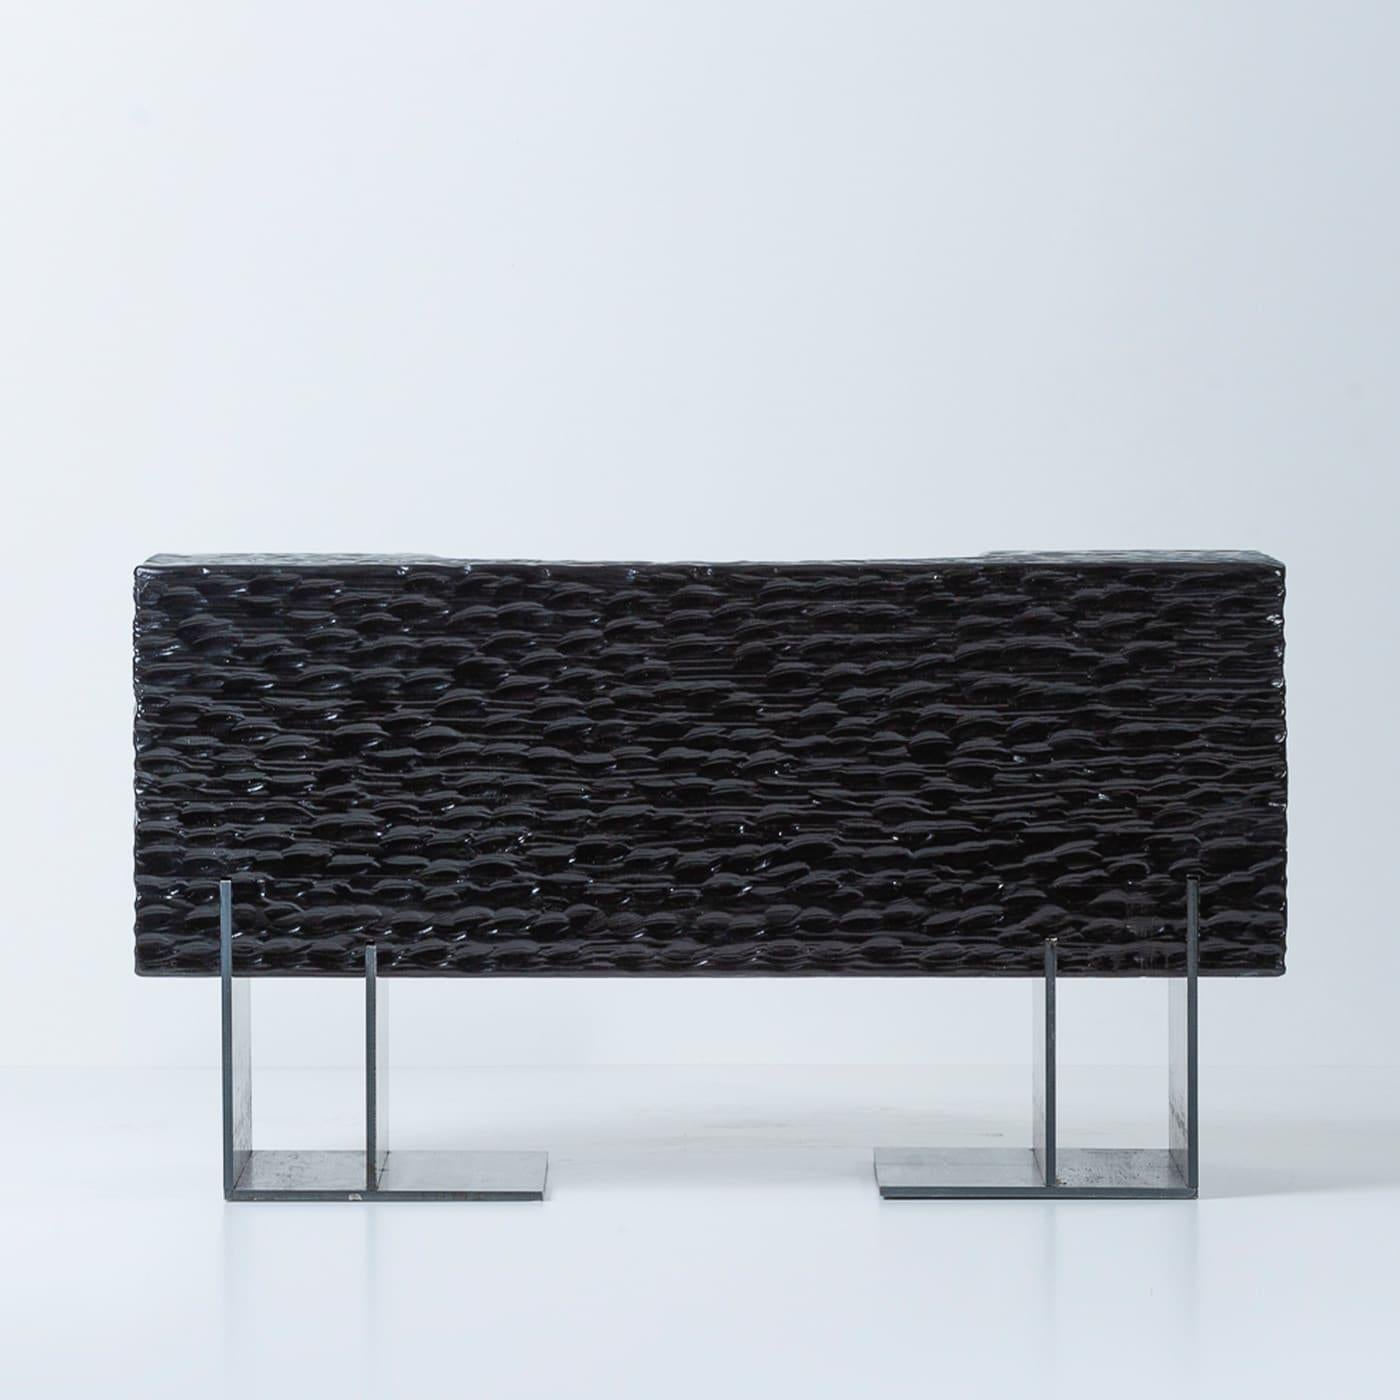 This statement-making bench captures the innate charm of organic shapes merged with the unrivaled mastery of skilled craftsmen. Raised on a sculptural base in black-oxide-finished iron, the stately structure in Douglas fir flaunts a